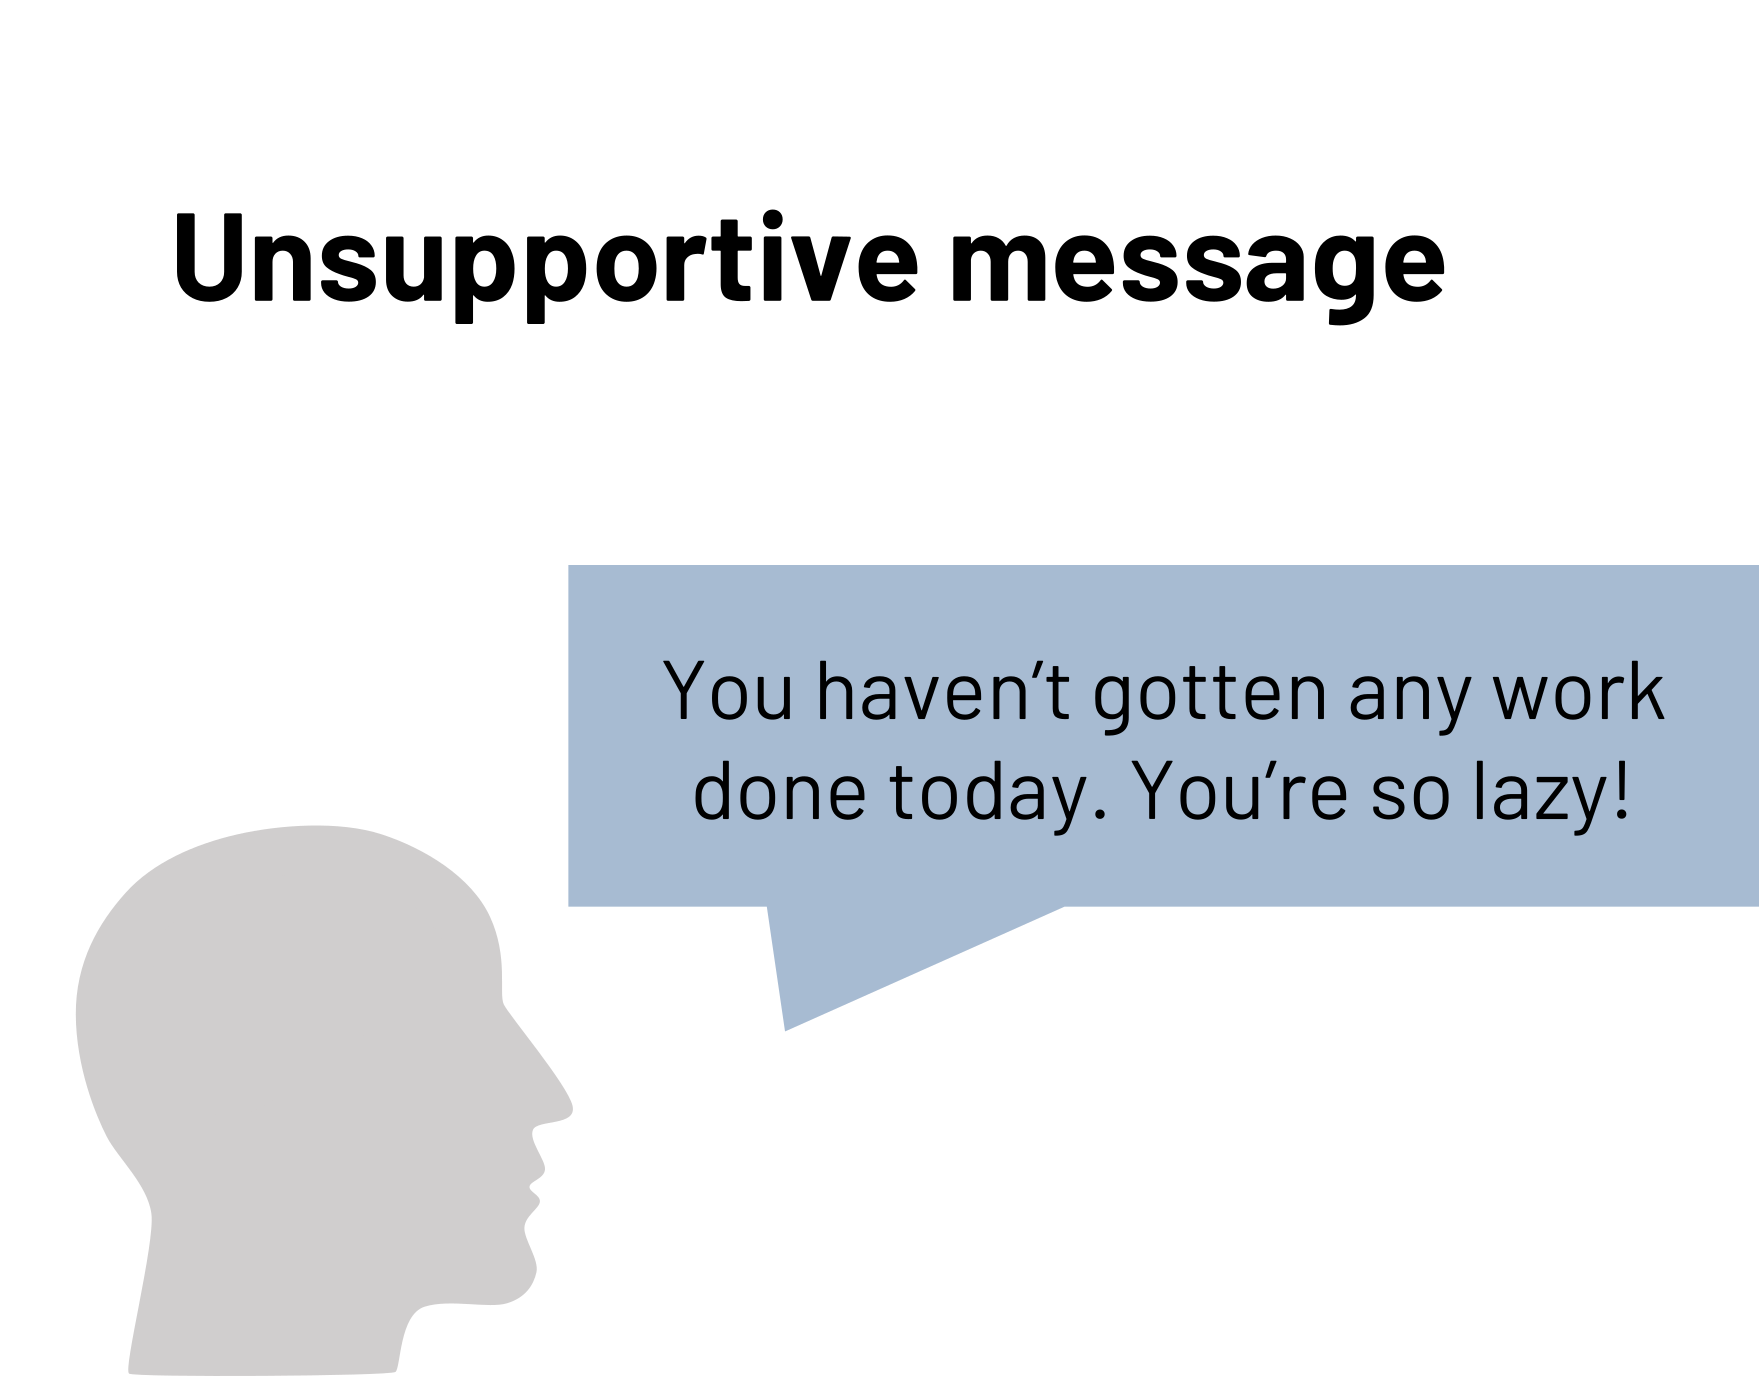 Title: Unsupportive message. Graphic outline of a head with a textbox: You haven't gotten any work done today. You're so lazy!